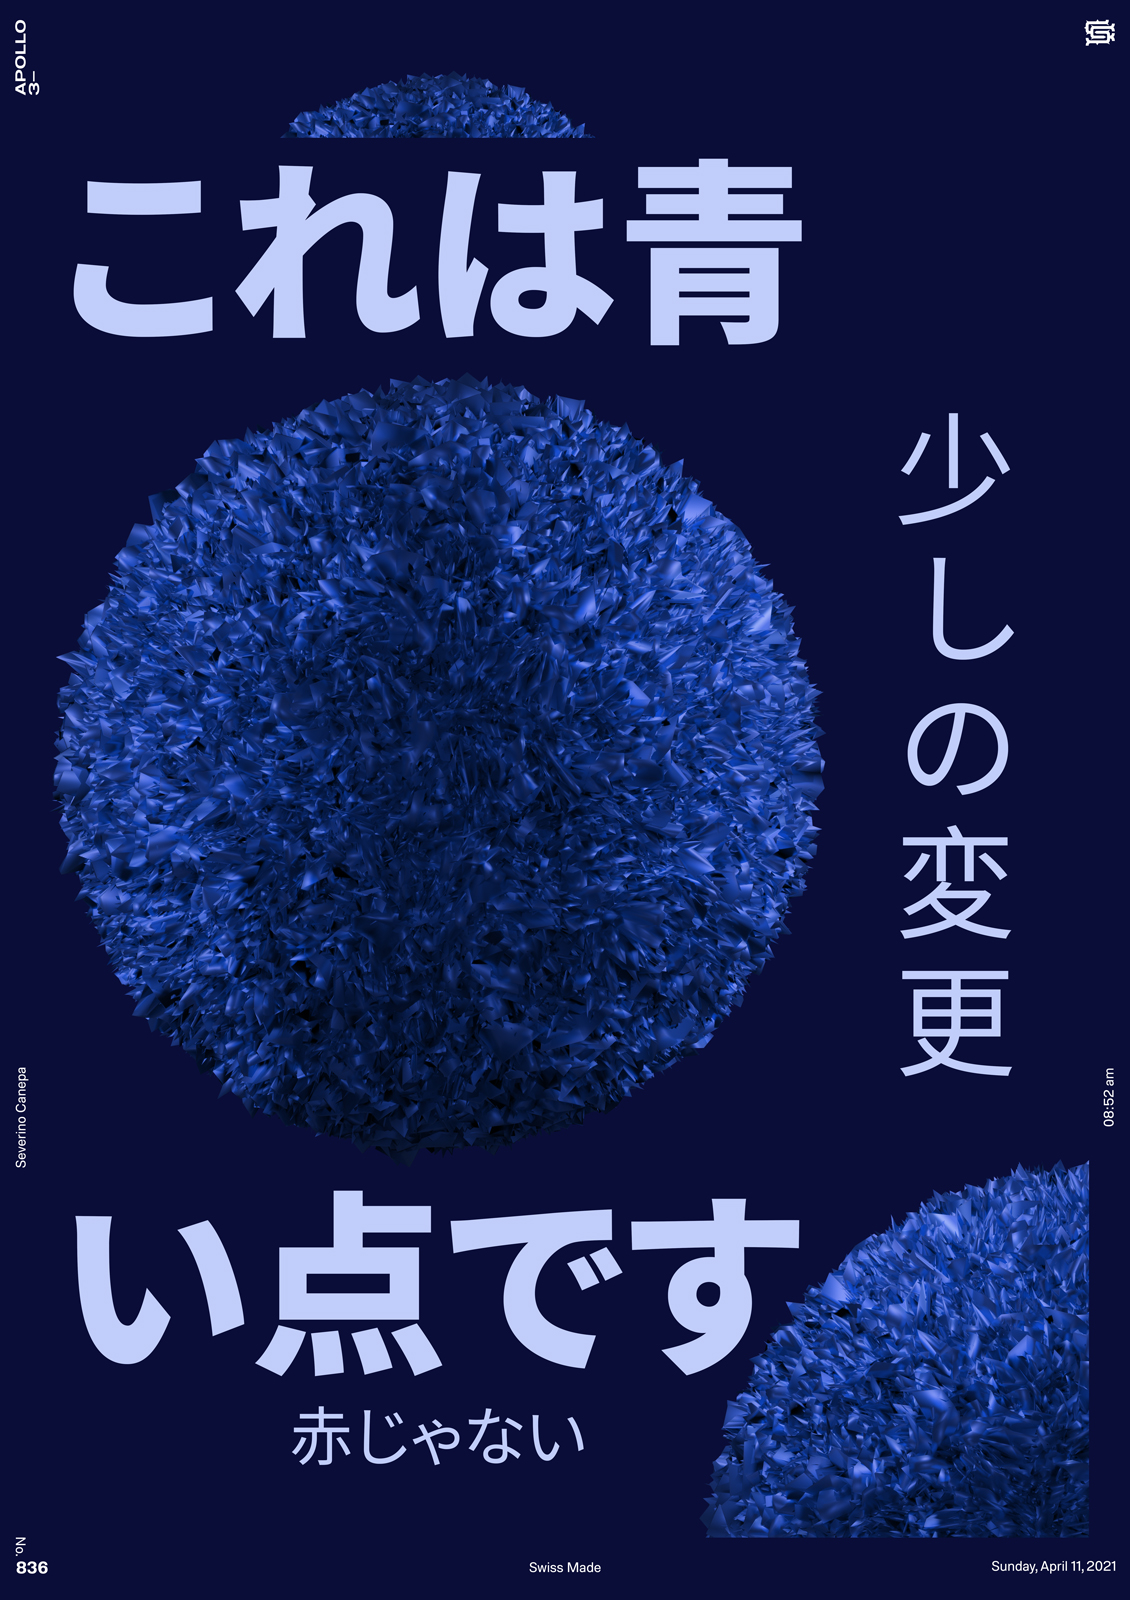 Japanese typographic composition I made with a 3D geometric shape